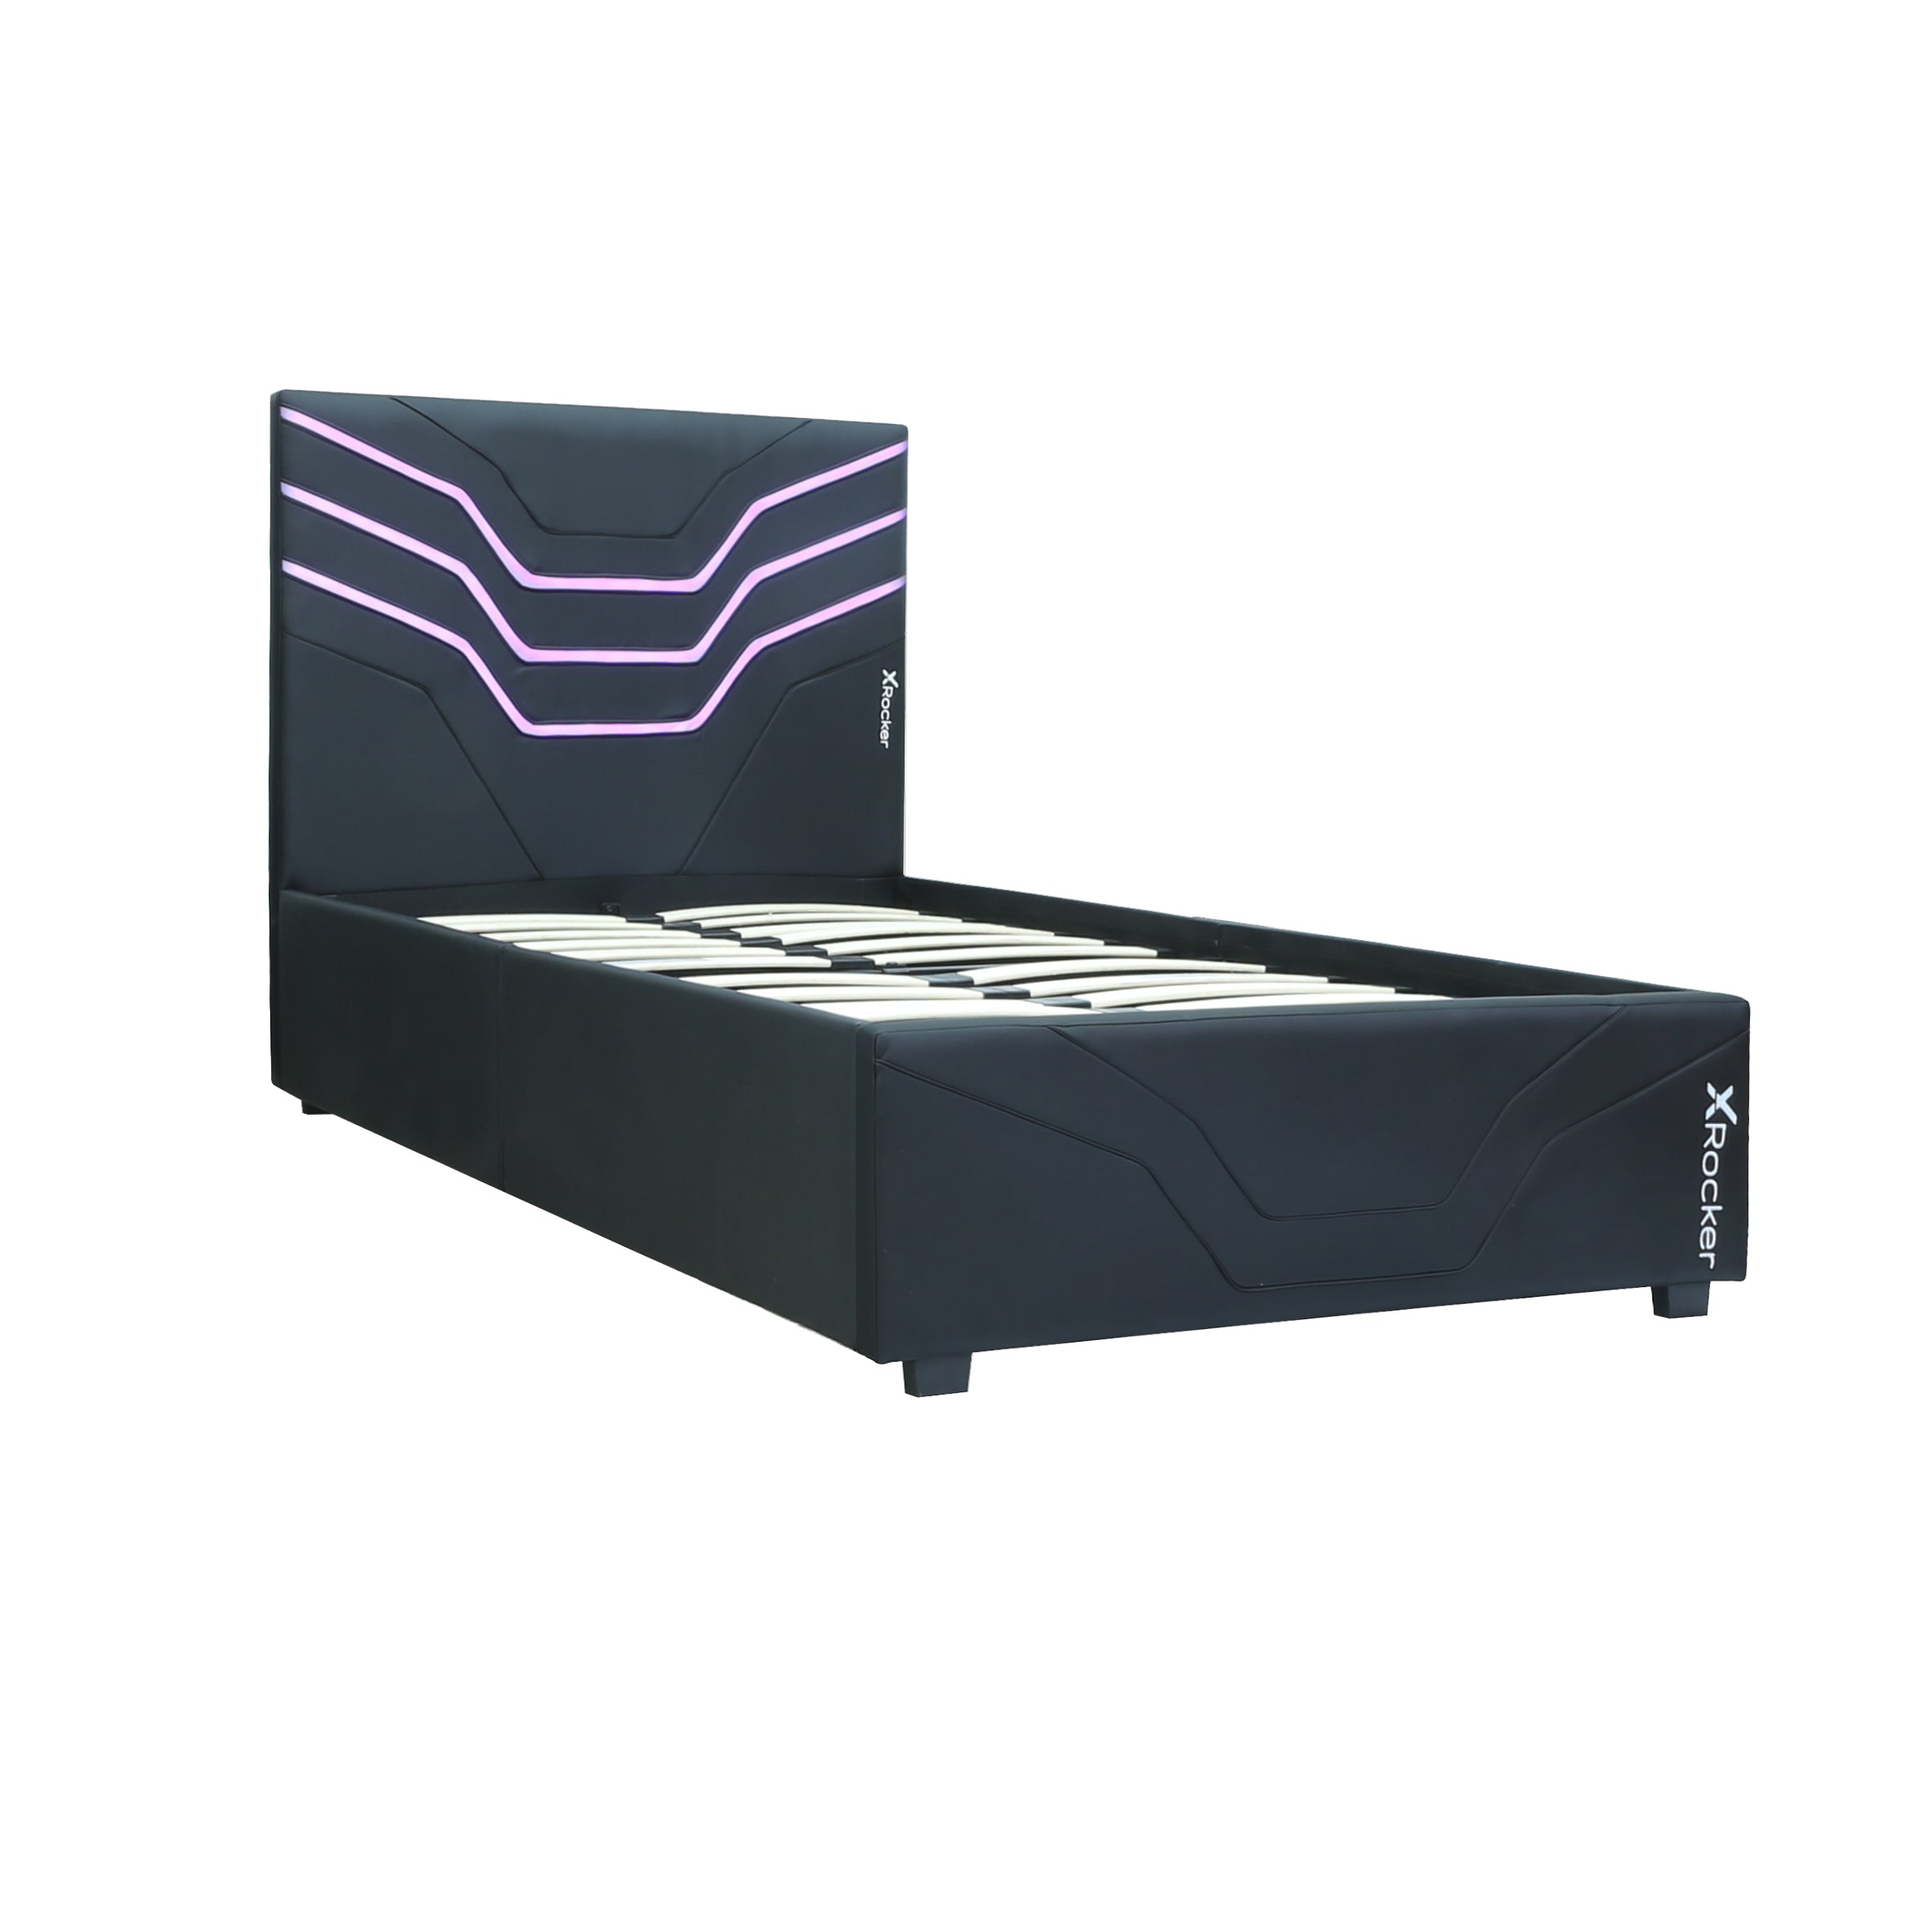 Cosmos RGB Gaming Twin Bed Frame with LED, Black, Twin